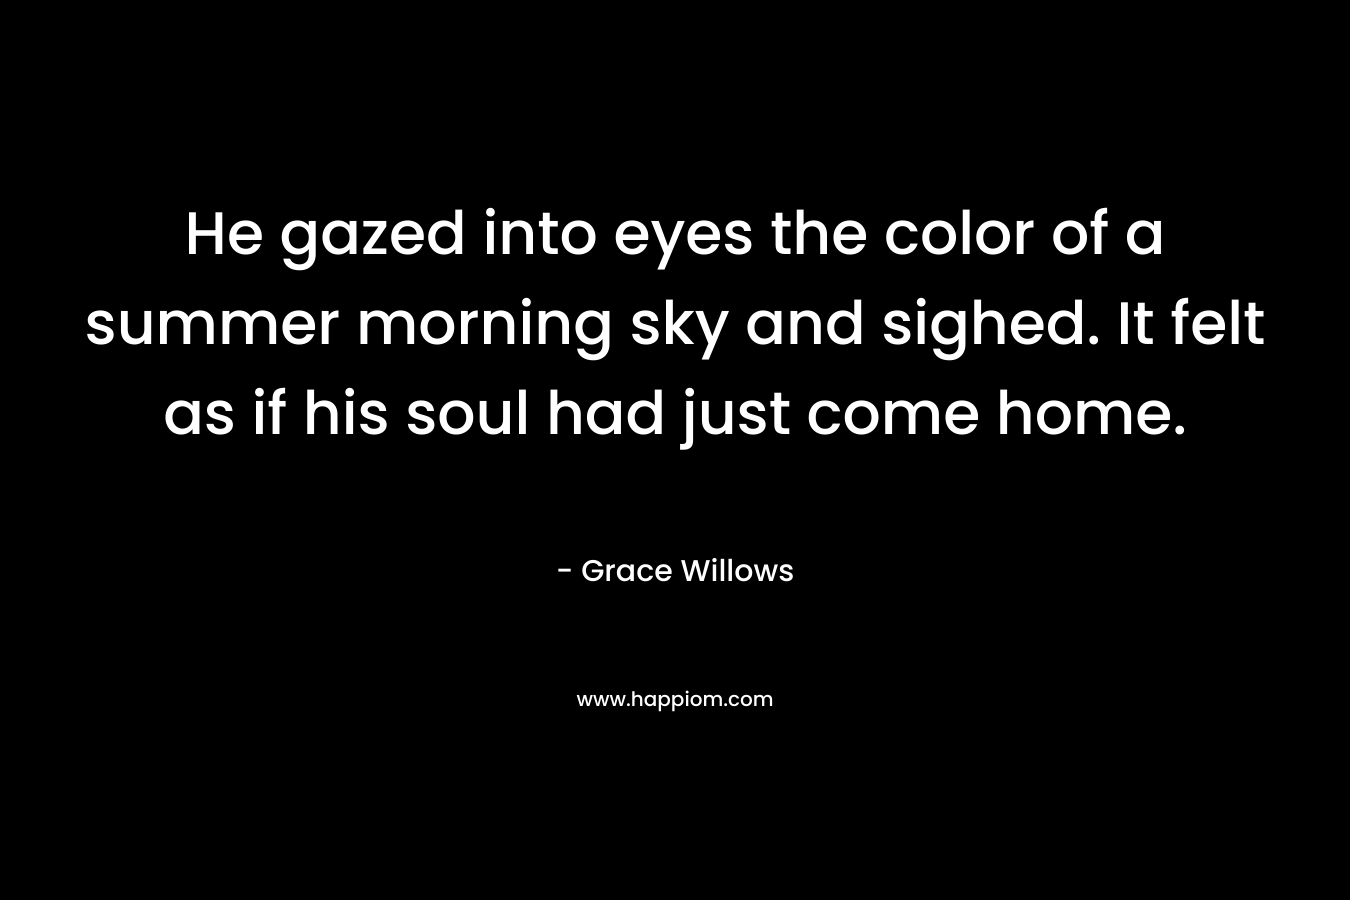 He gazed into eyes the color of a summer morning sky and sighed. It felt as if his soul had just come home. – Grace Willows